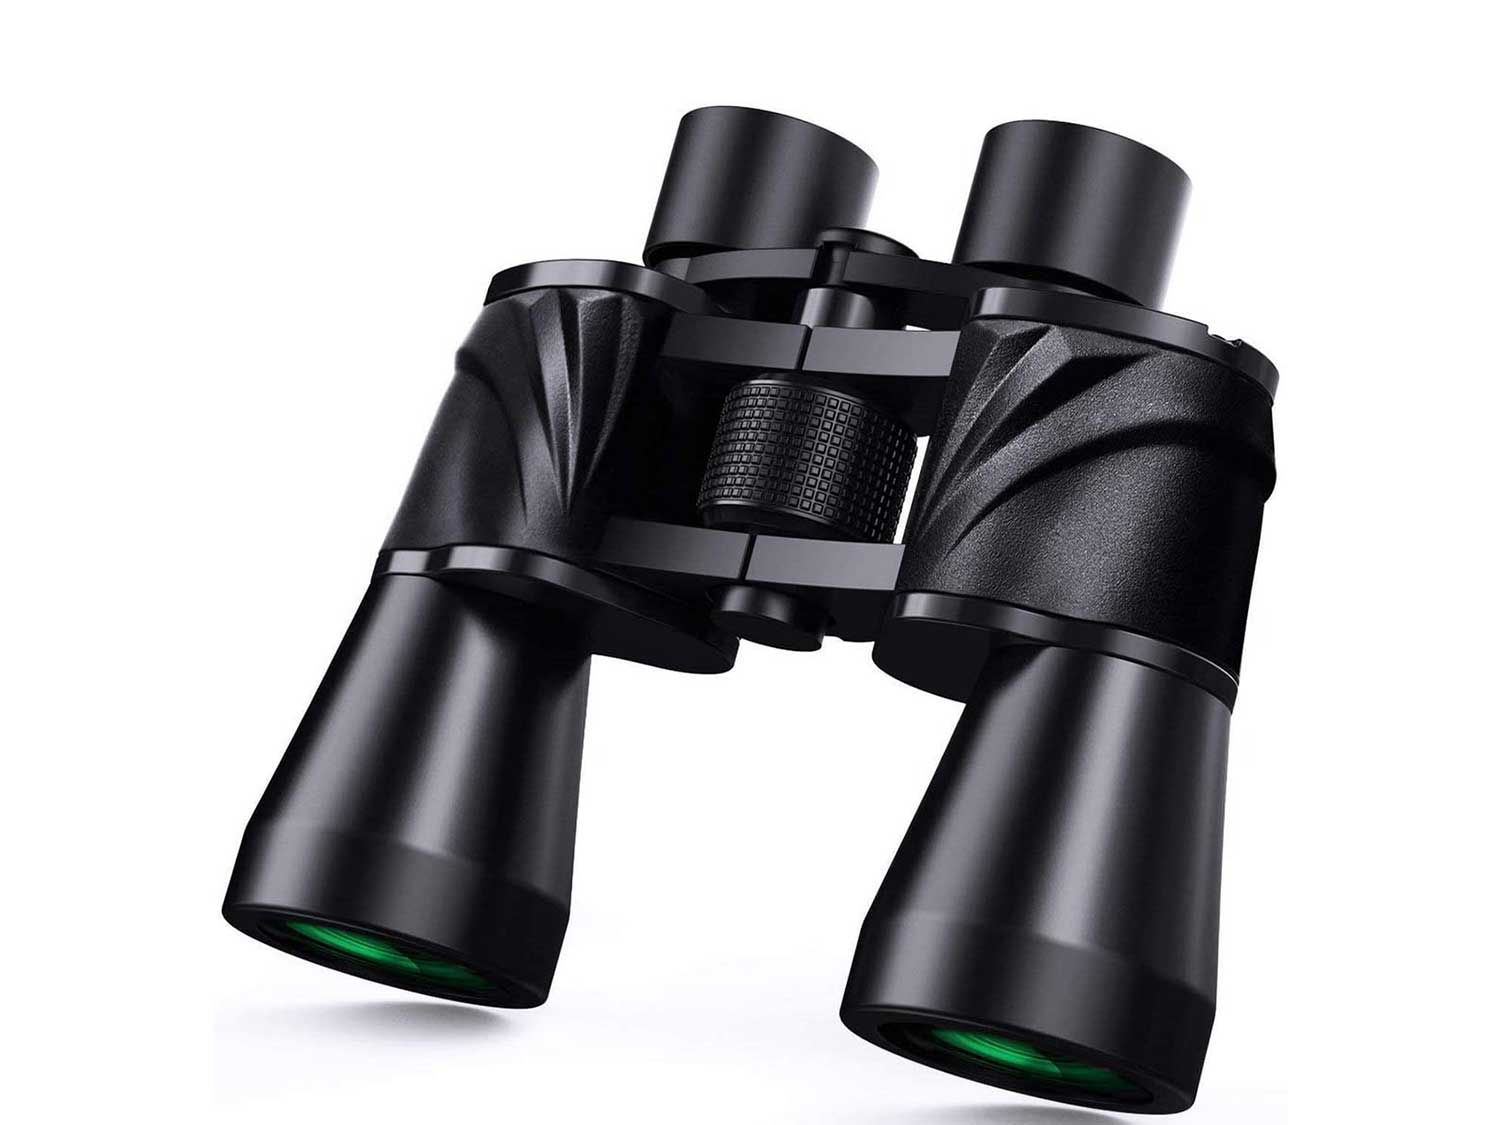 10x50 Powerful Binoculars for Adults with Low Light Night Vision, Large Eyepiece, 10 Seconds Quick Focus, Waterproof Wide Angle Compact-Binoculars-for-Adults-Bird-Watching, Hunting, Concerts